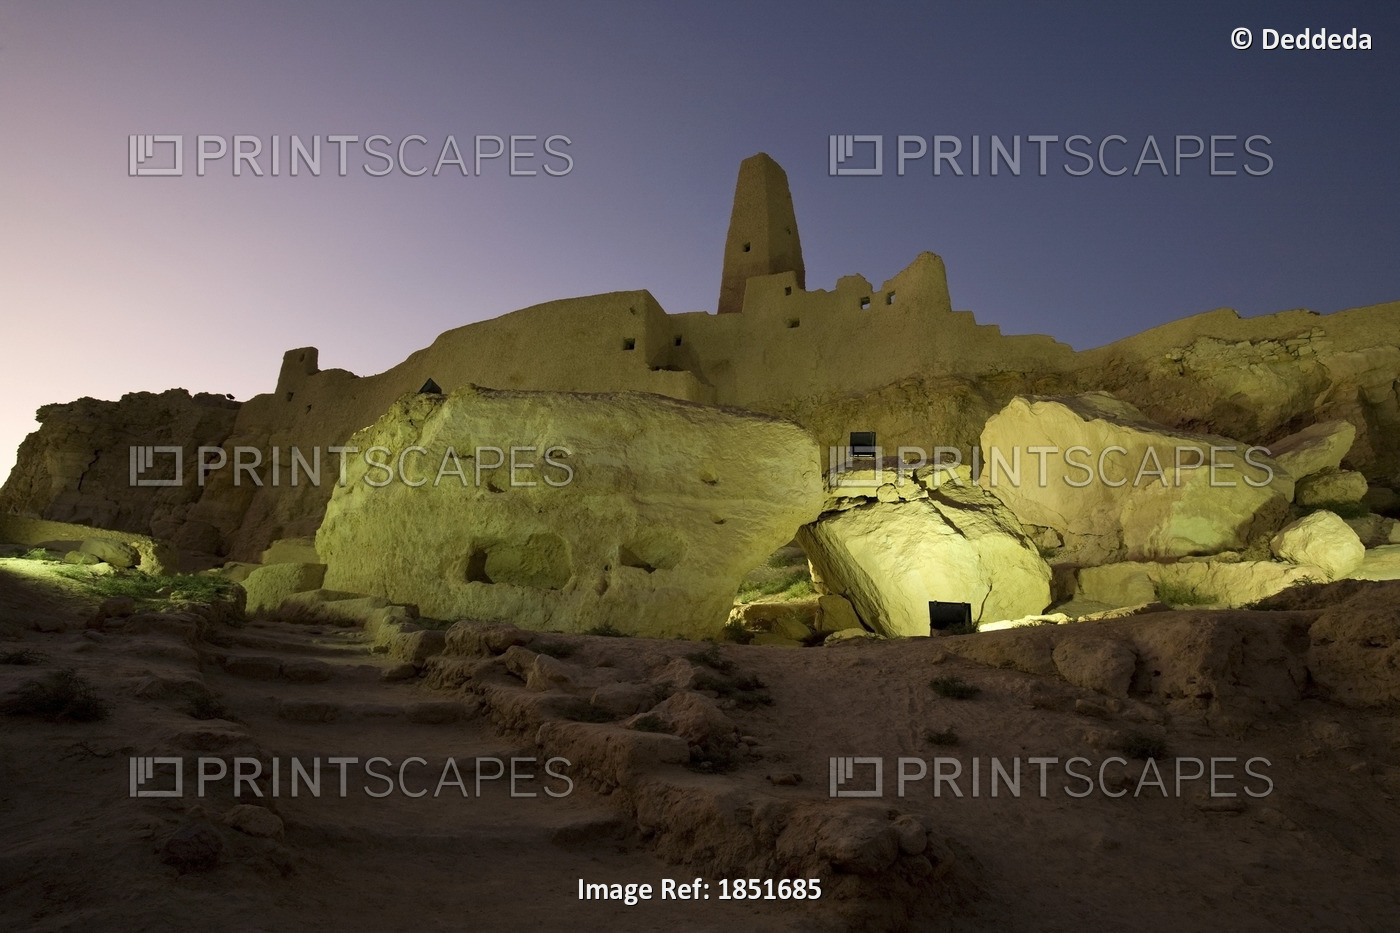 The Temple Of The Oracle, Siwa Oasis, Egypt